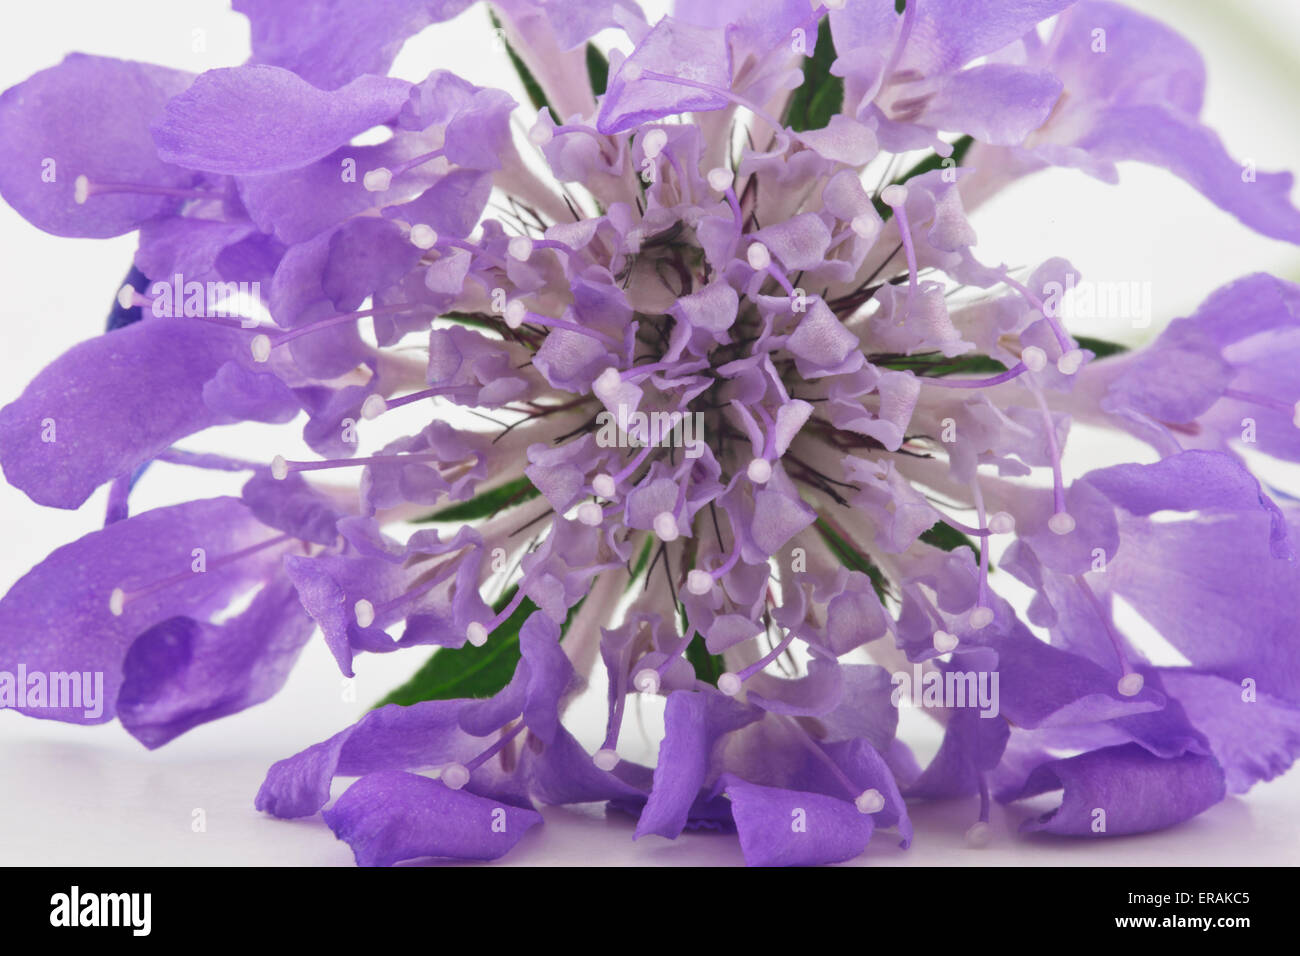 Macro image of purple and lavender hues of scabiosa blossom, a pincushion, perennial flower that attracts butterflies. Stock Photo